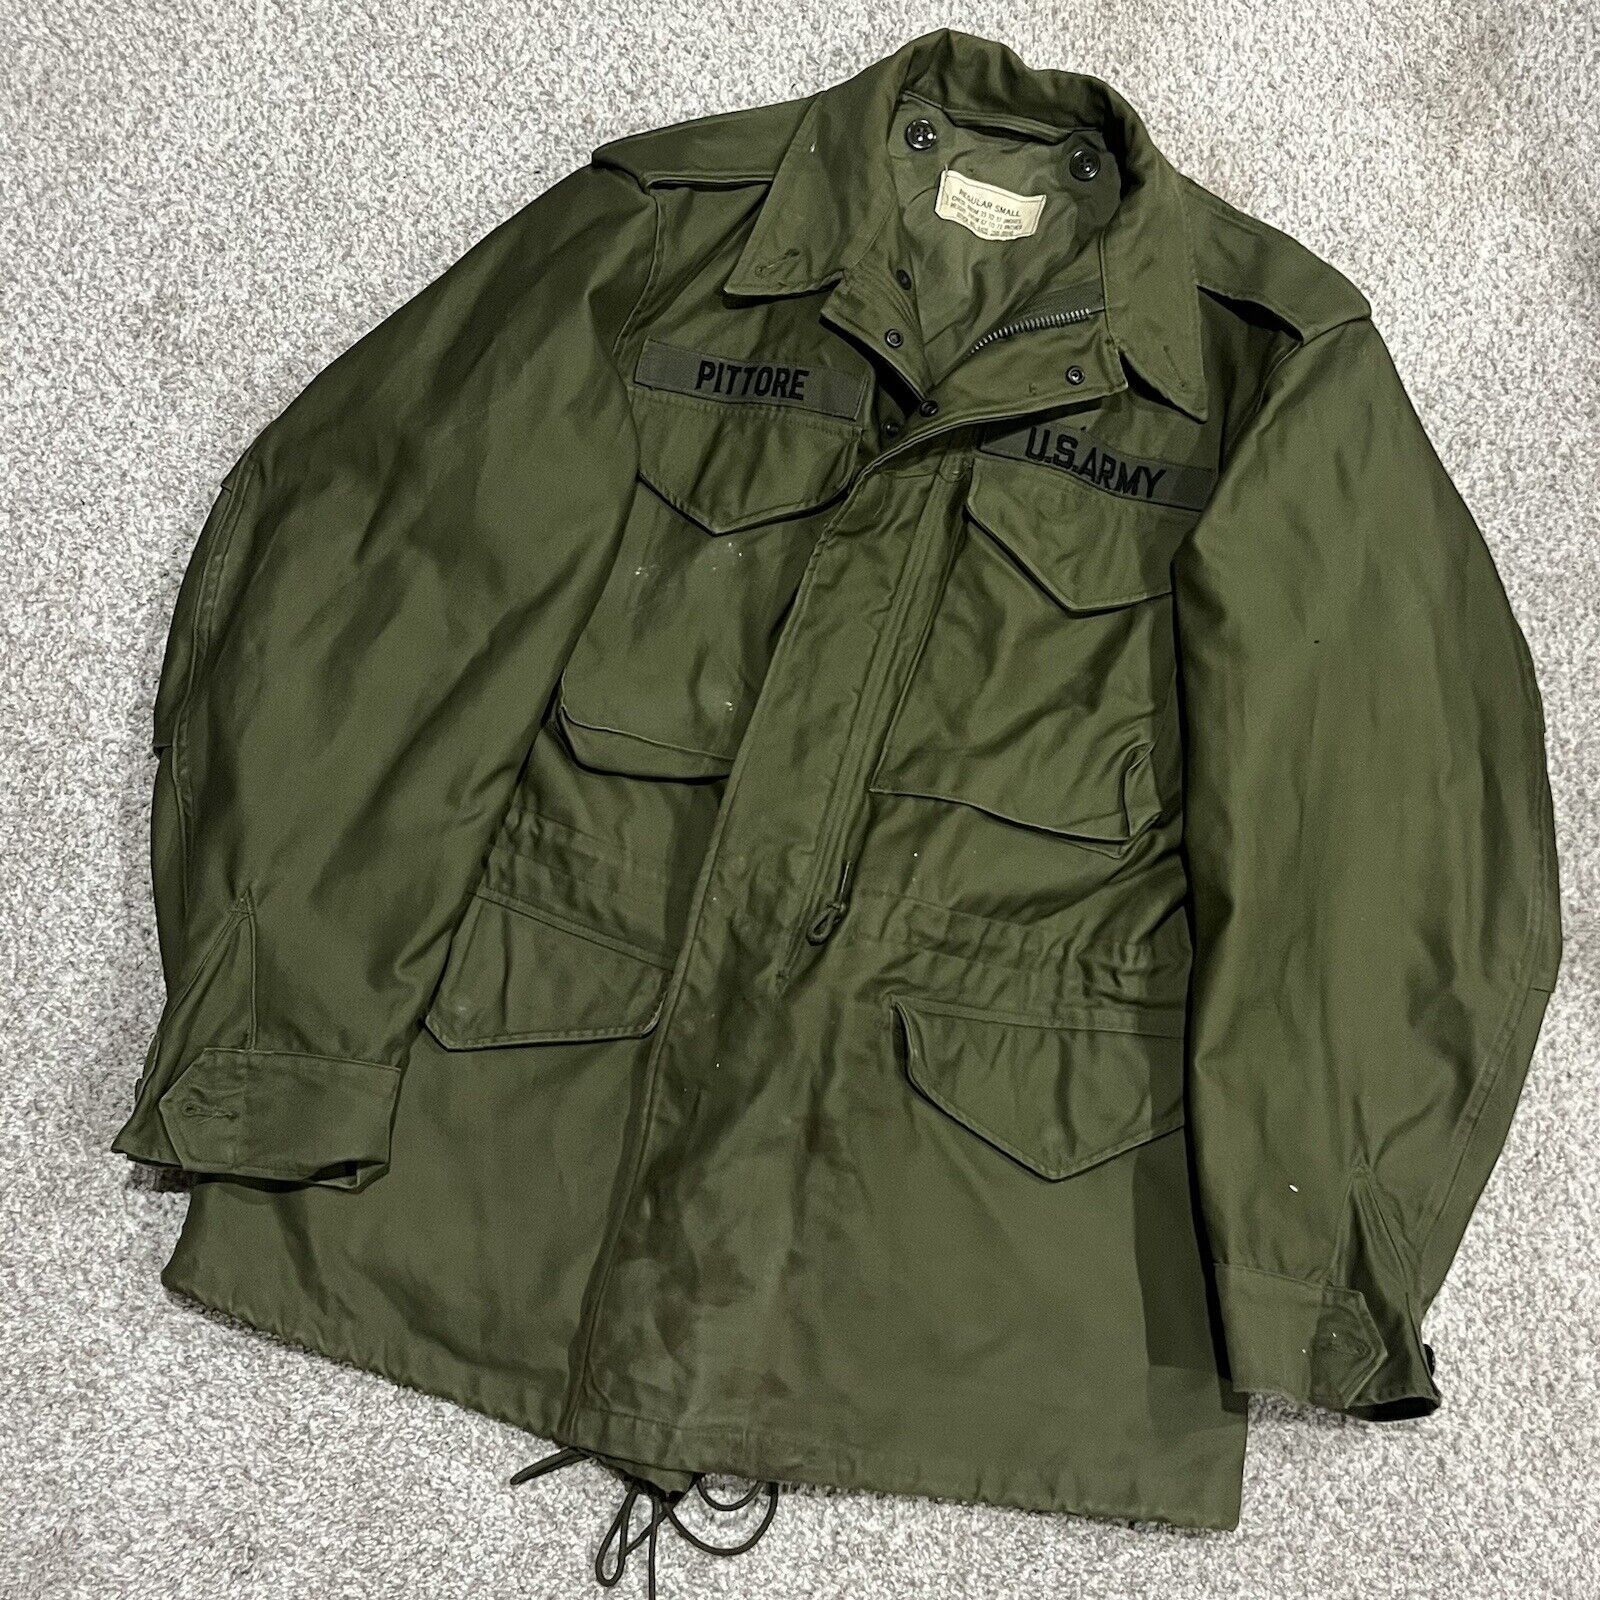 US Army Jacket Small M 1961 Vietnam Field OG 107 Olive Green Sateen Taxi Driver